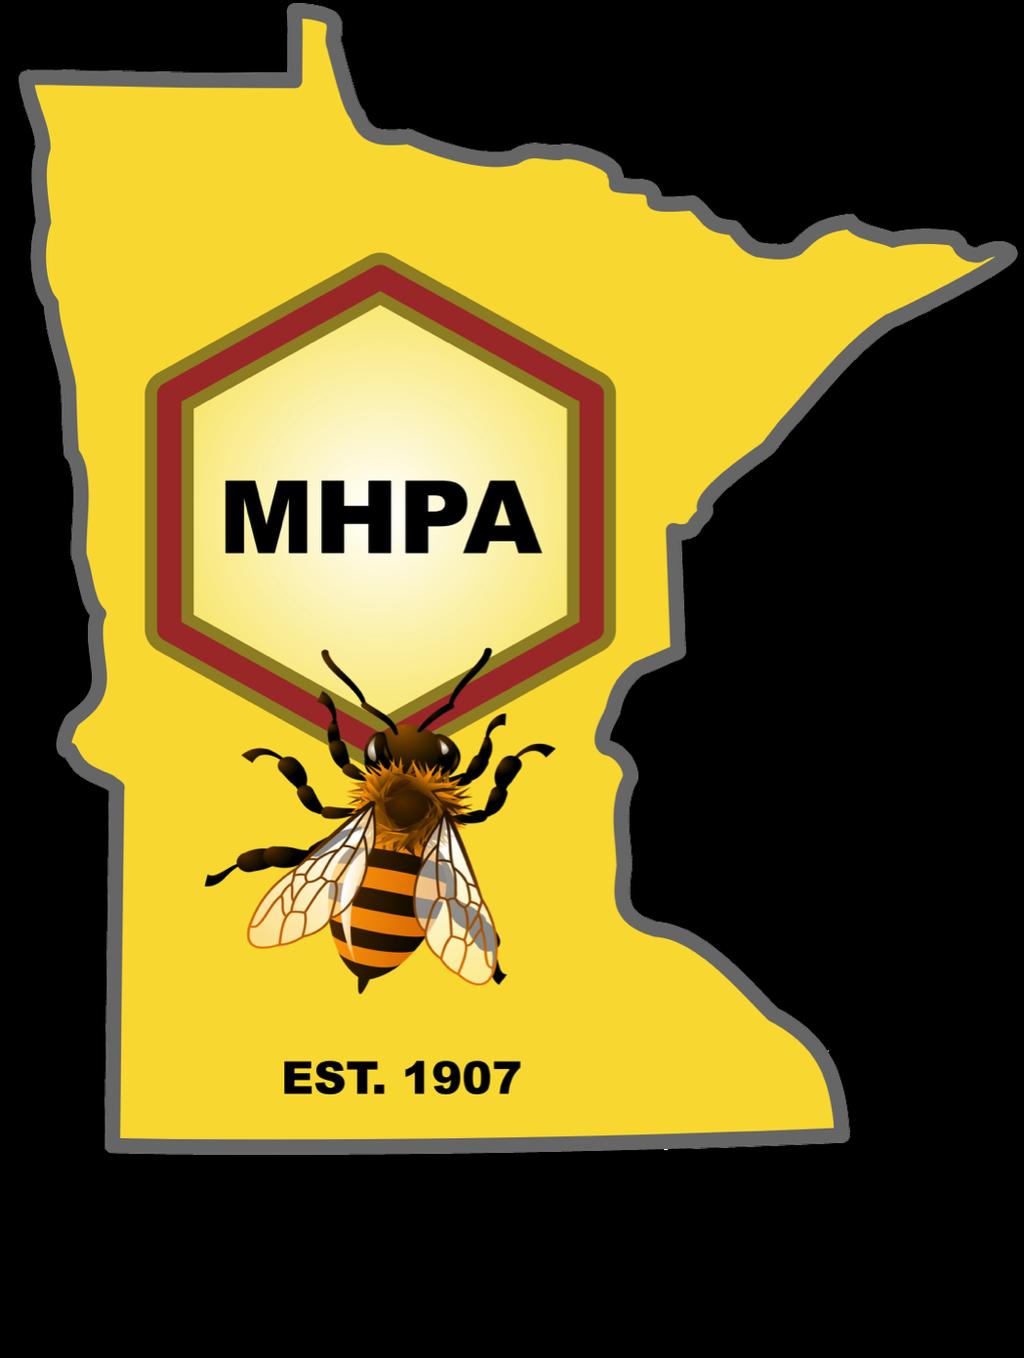 Mission: The purpose of the Minnesota Honey Queen is to promote honey, and educate the public on all aspects of the beekeeping industry.